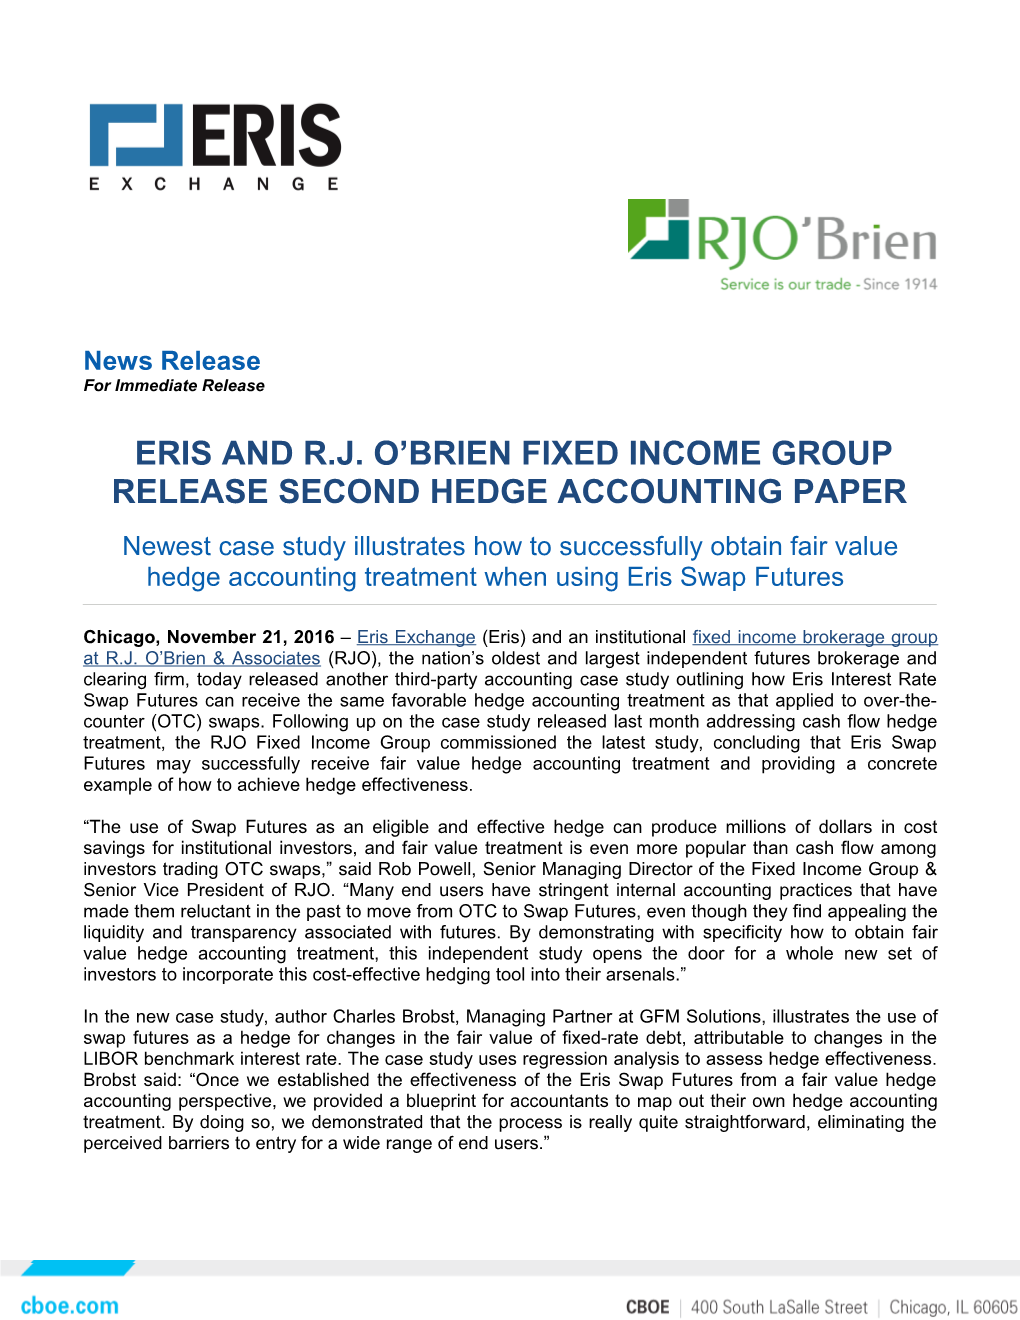 Eris and R.J. O Brien Fixed Income Group Release Second Hedge Accounting Paper